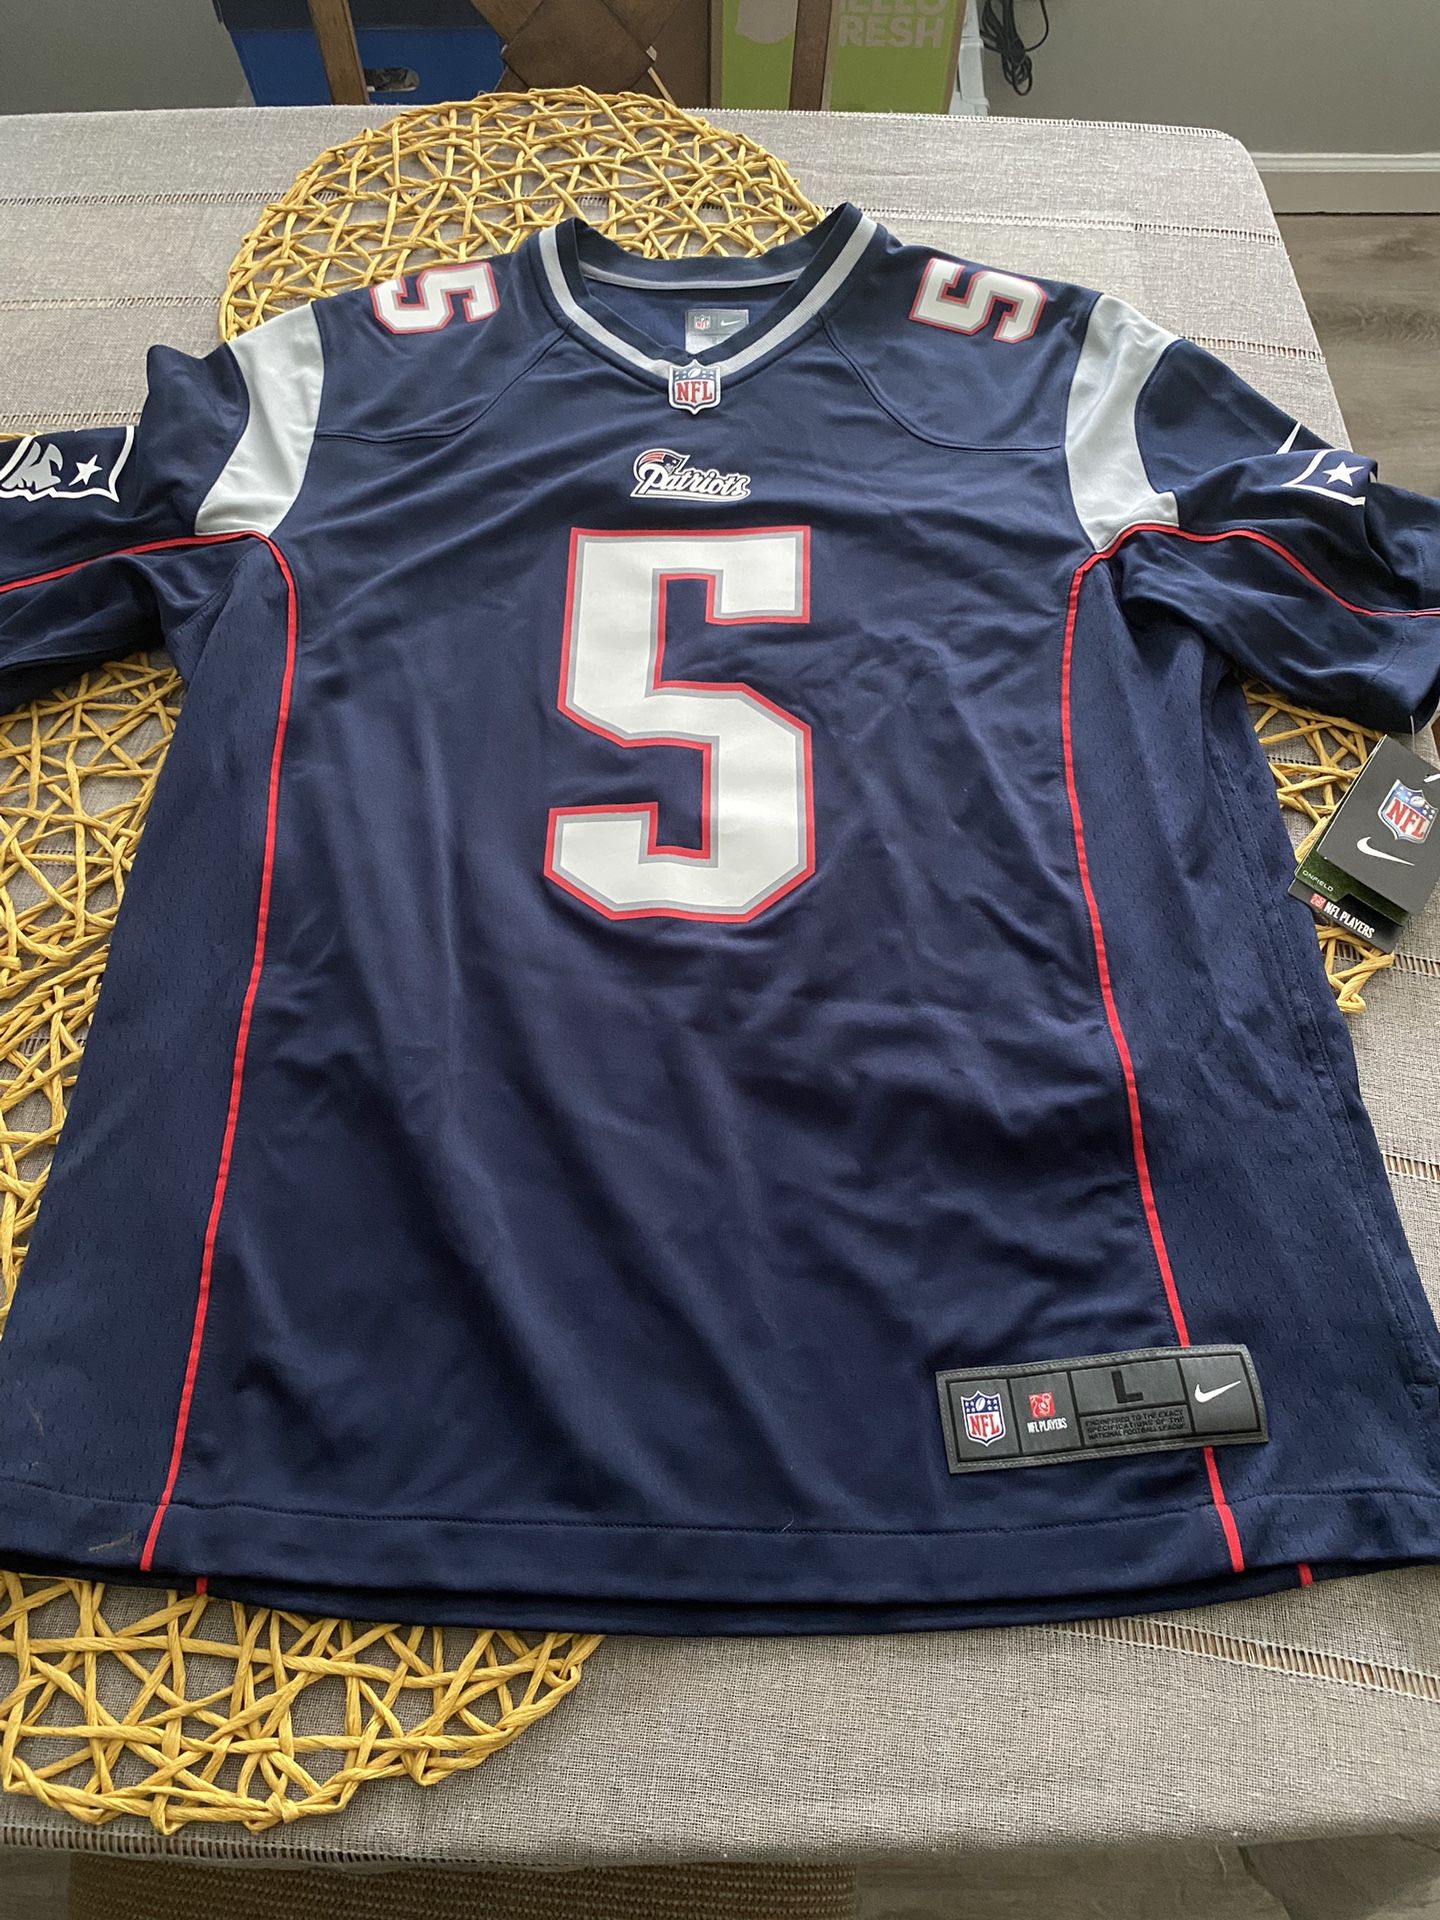 Nike NFL New England Patriots Tim Tebow Jersey